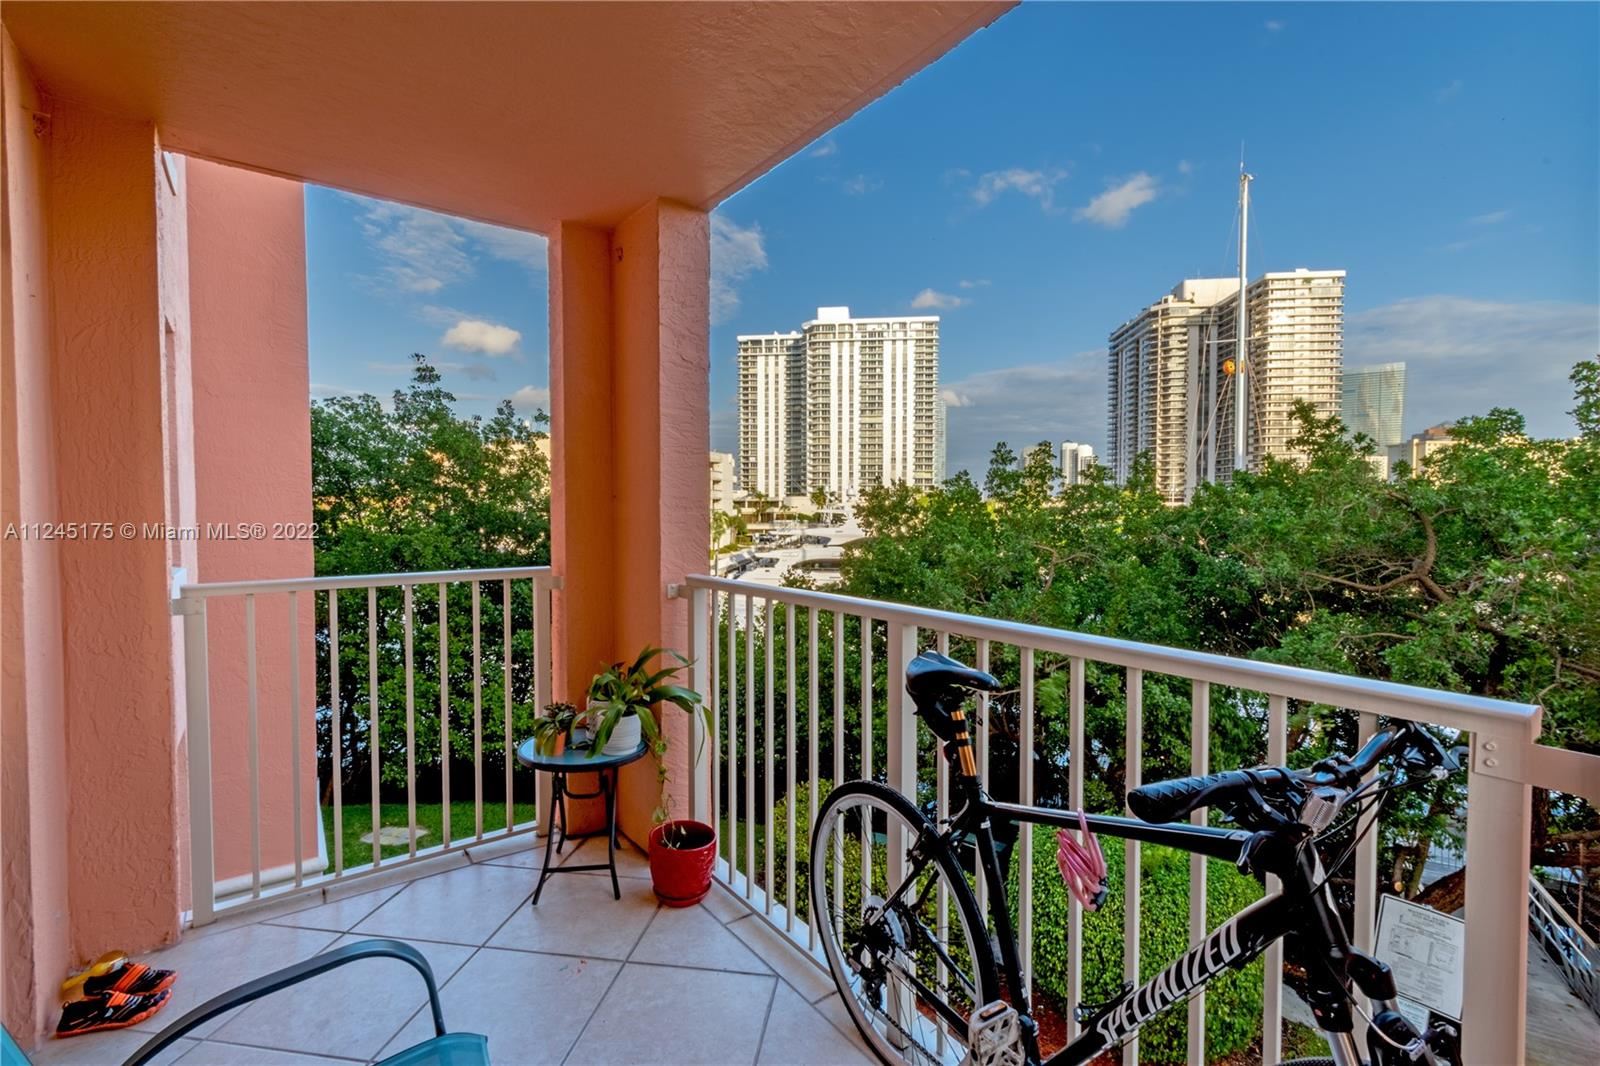 Photo 11 of Listing MLS a11245175 in 19999 E Country Club Dr #1307 Aventura FL 33180